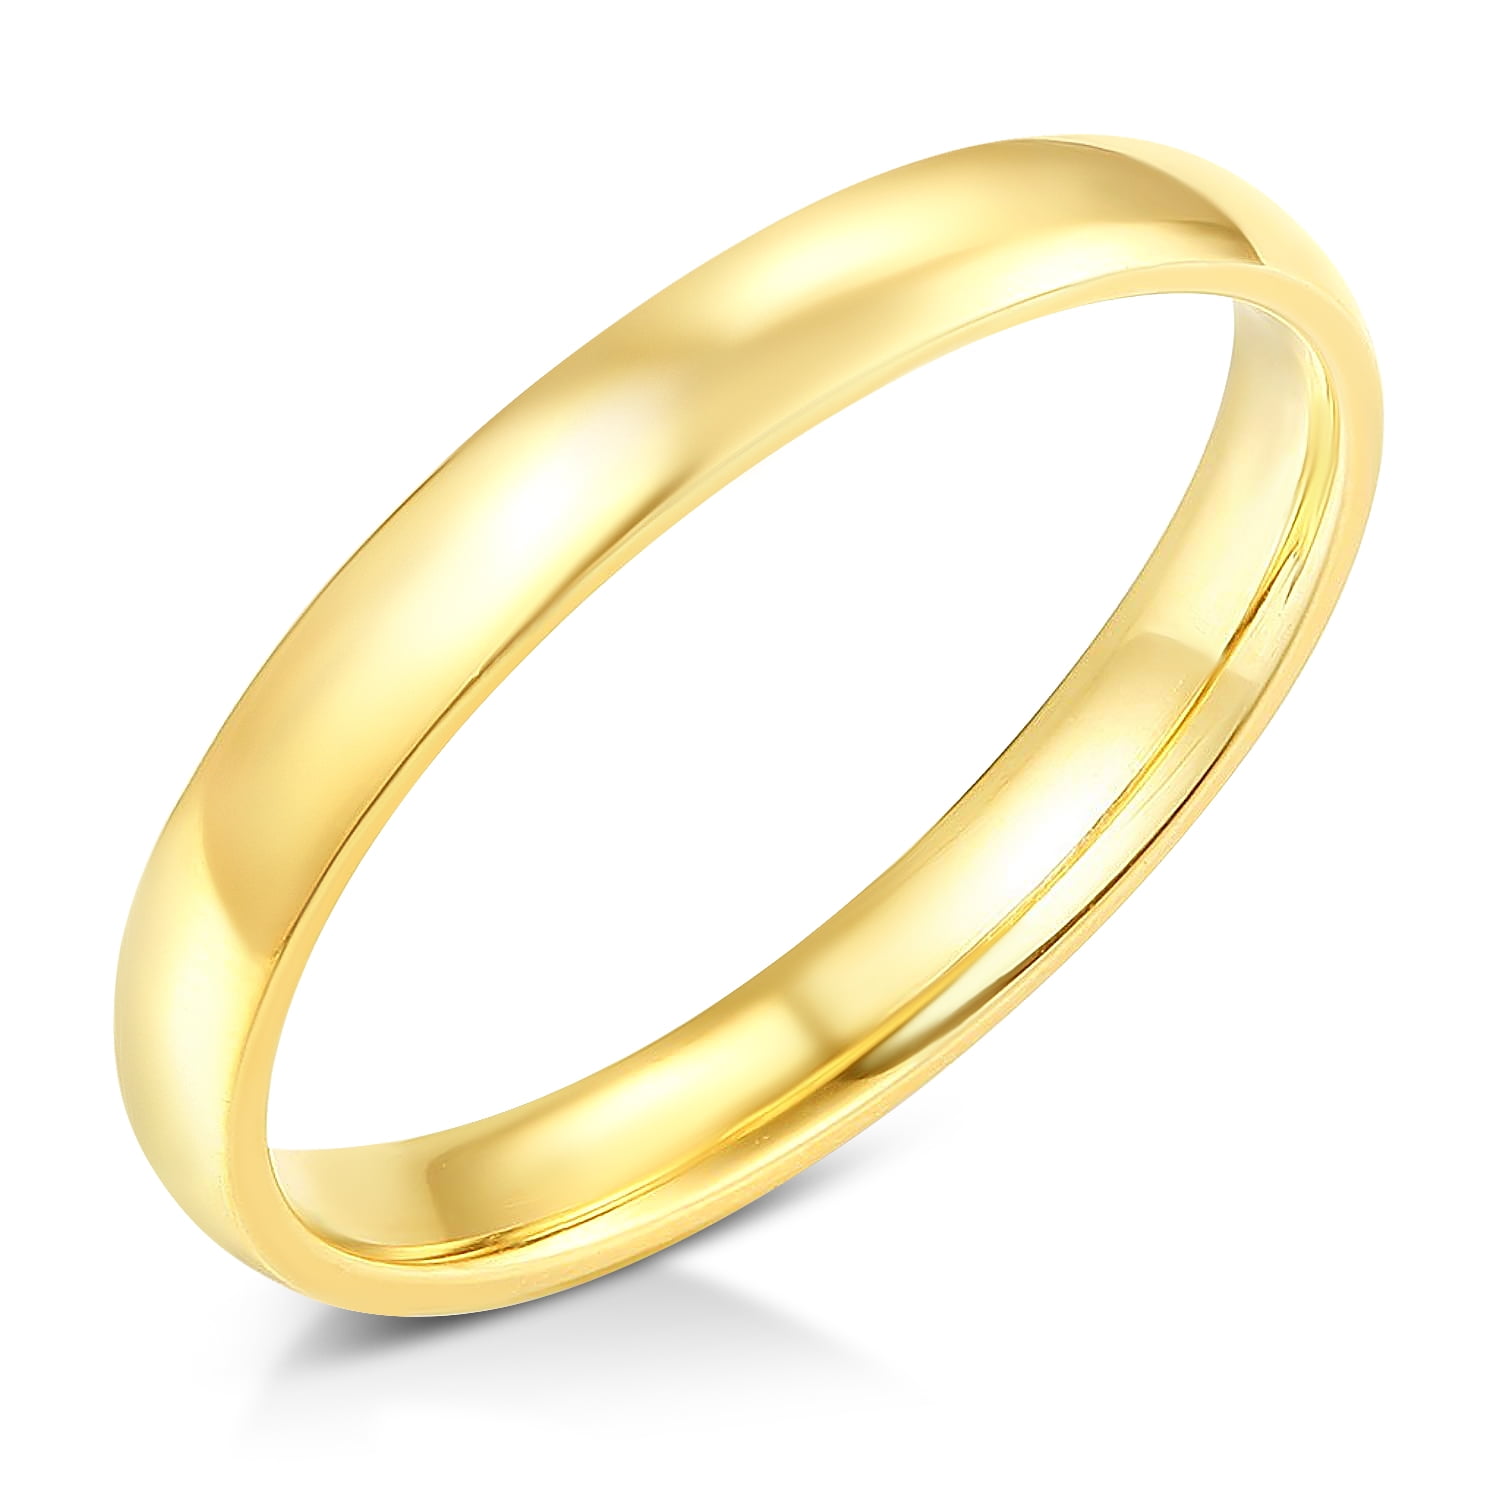 Ioka 14k Solid Yellow OR White Gold 7mm Plain Standard Classic Fit Traditional Wedding Band Ring 